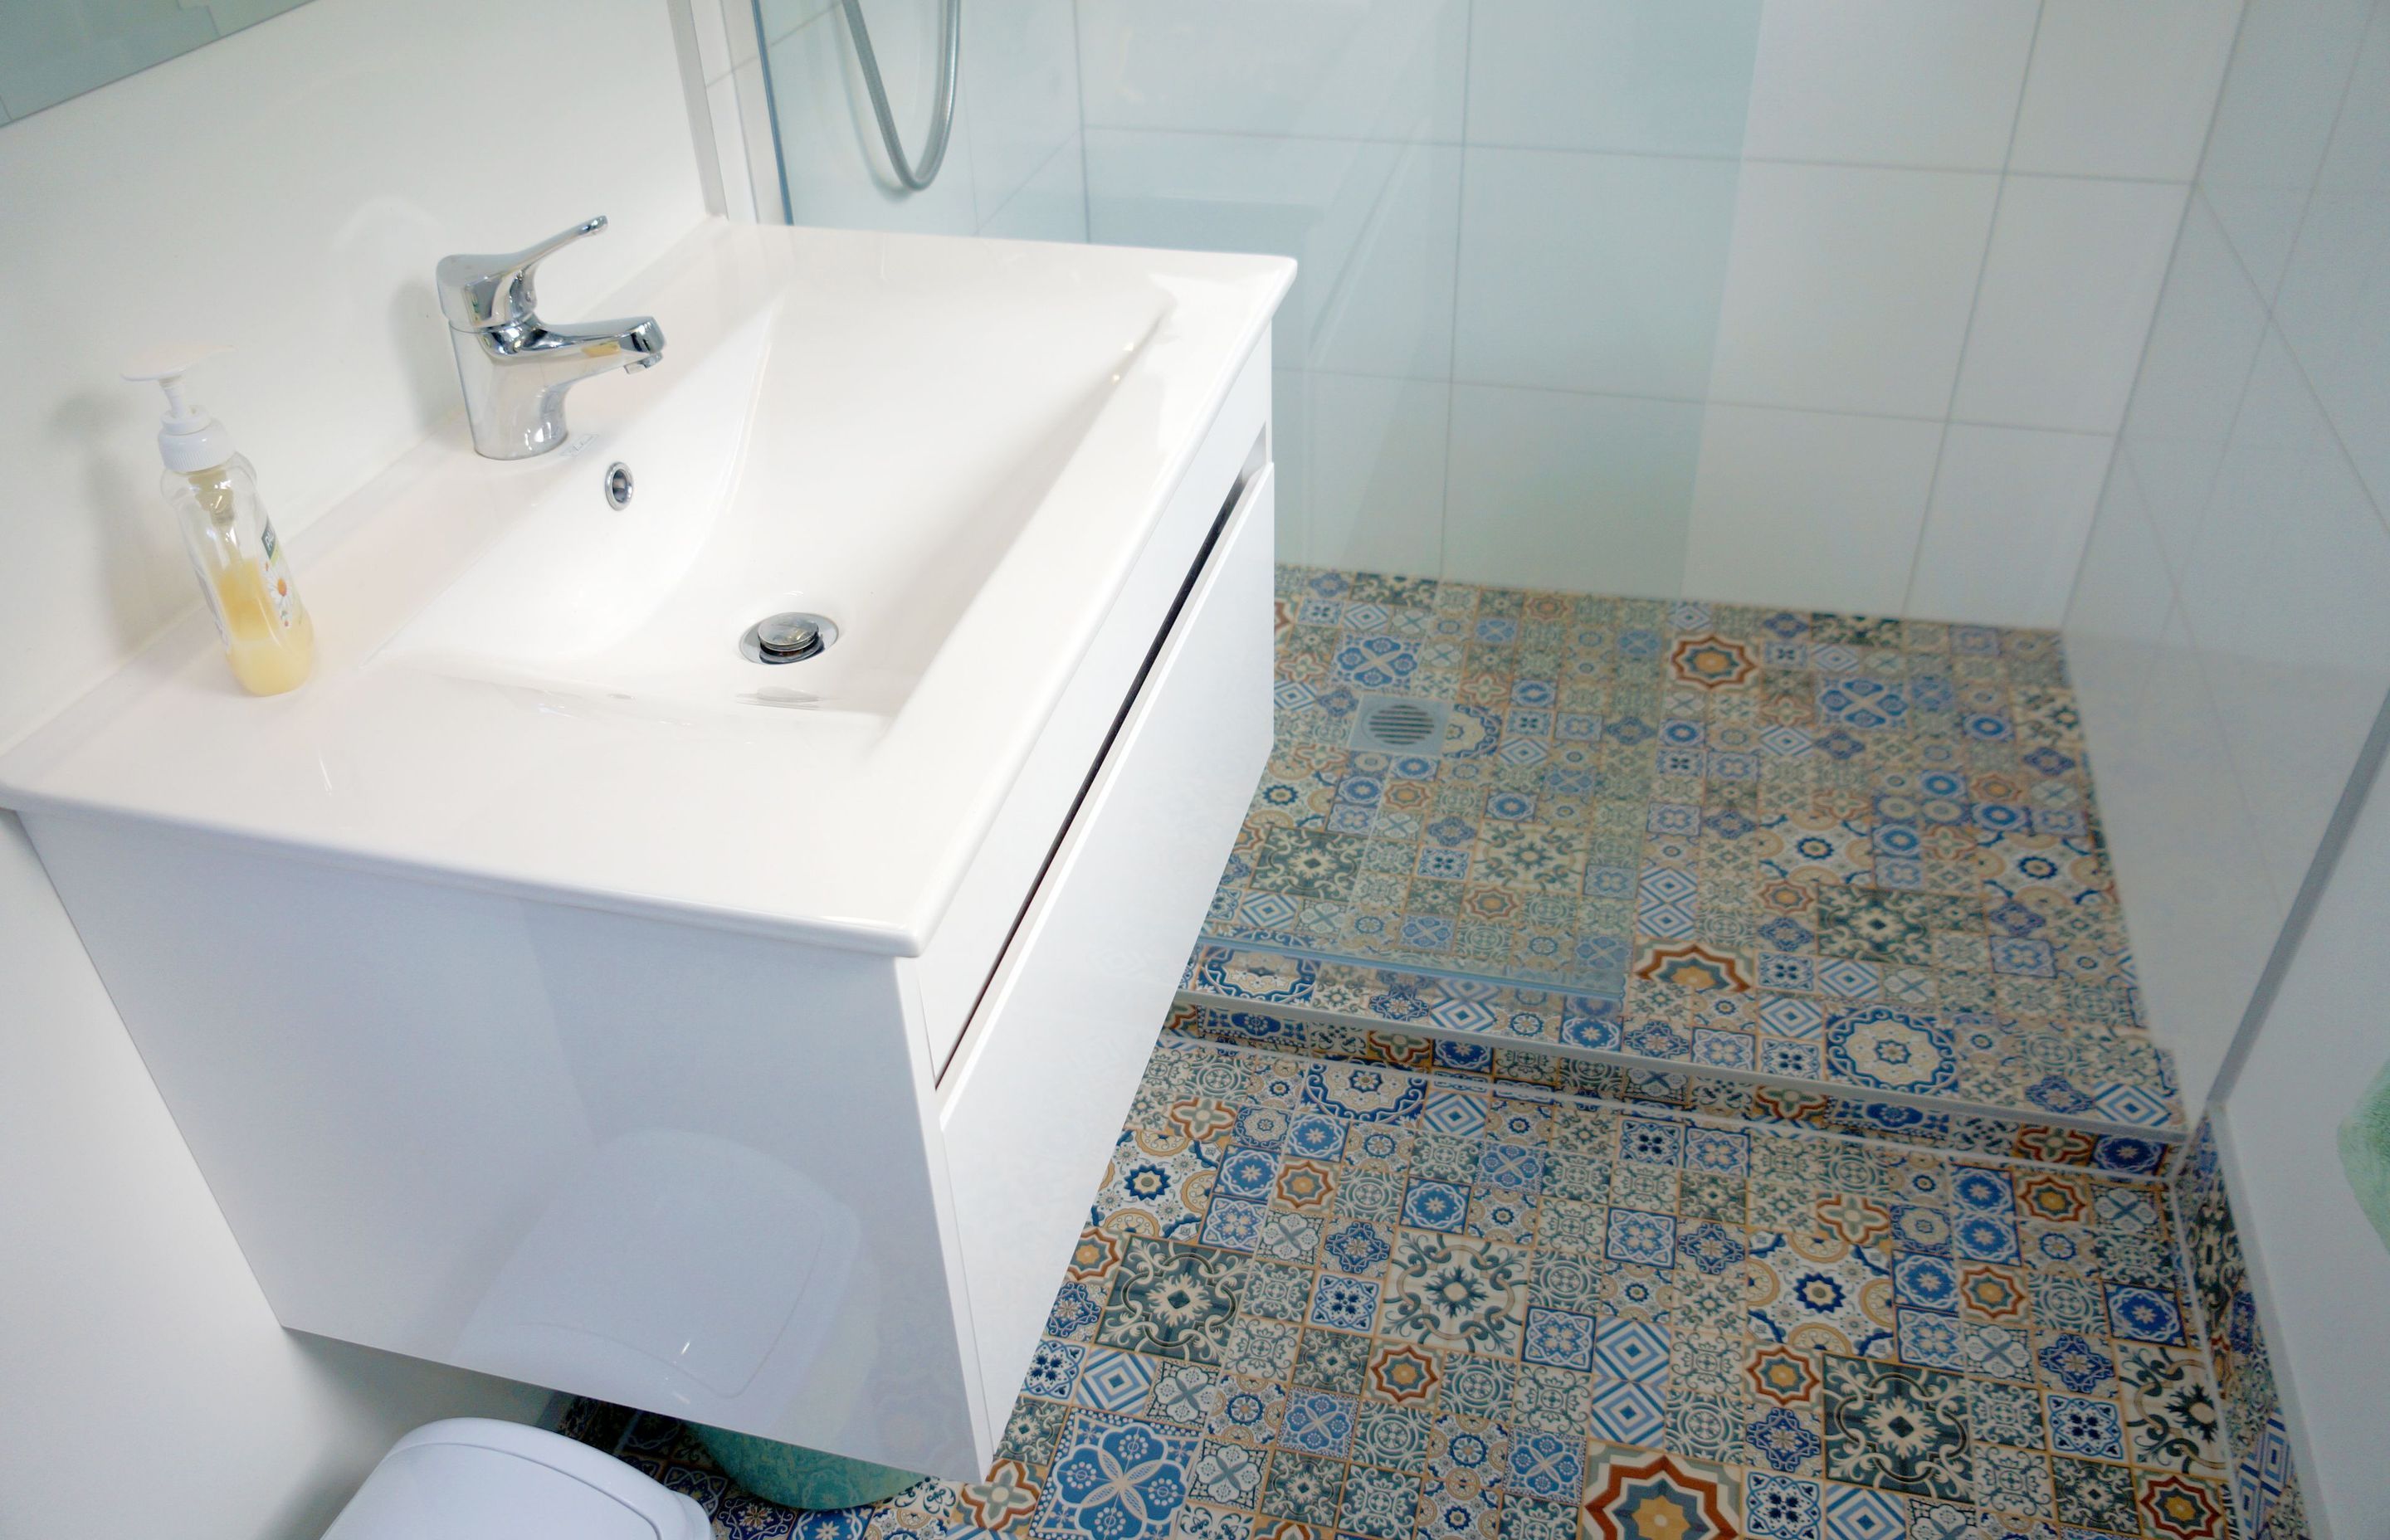 The bathroom was renovated with new fixtures, vanity, shower, and mosaic tiles. 